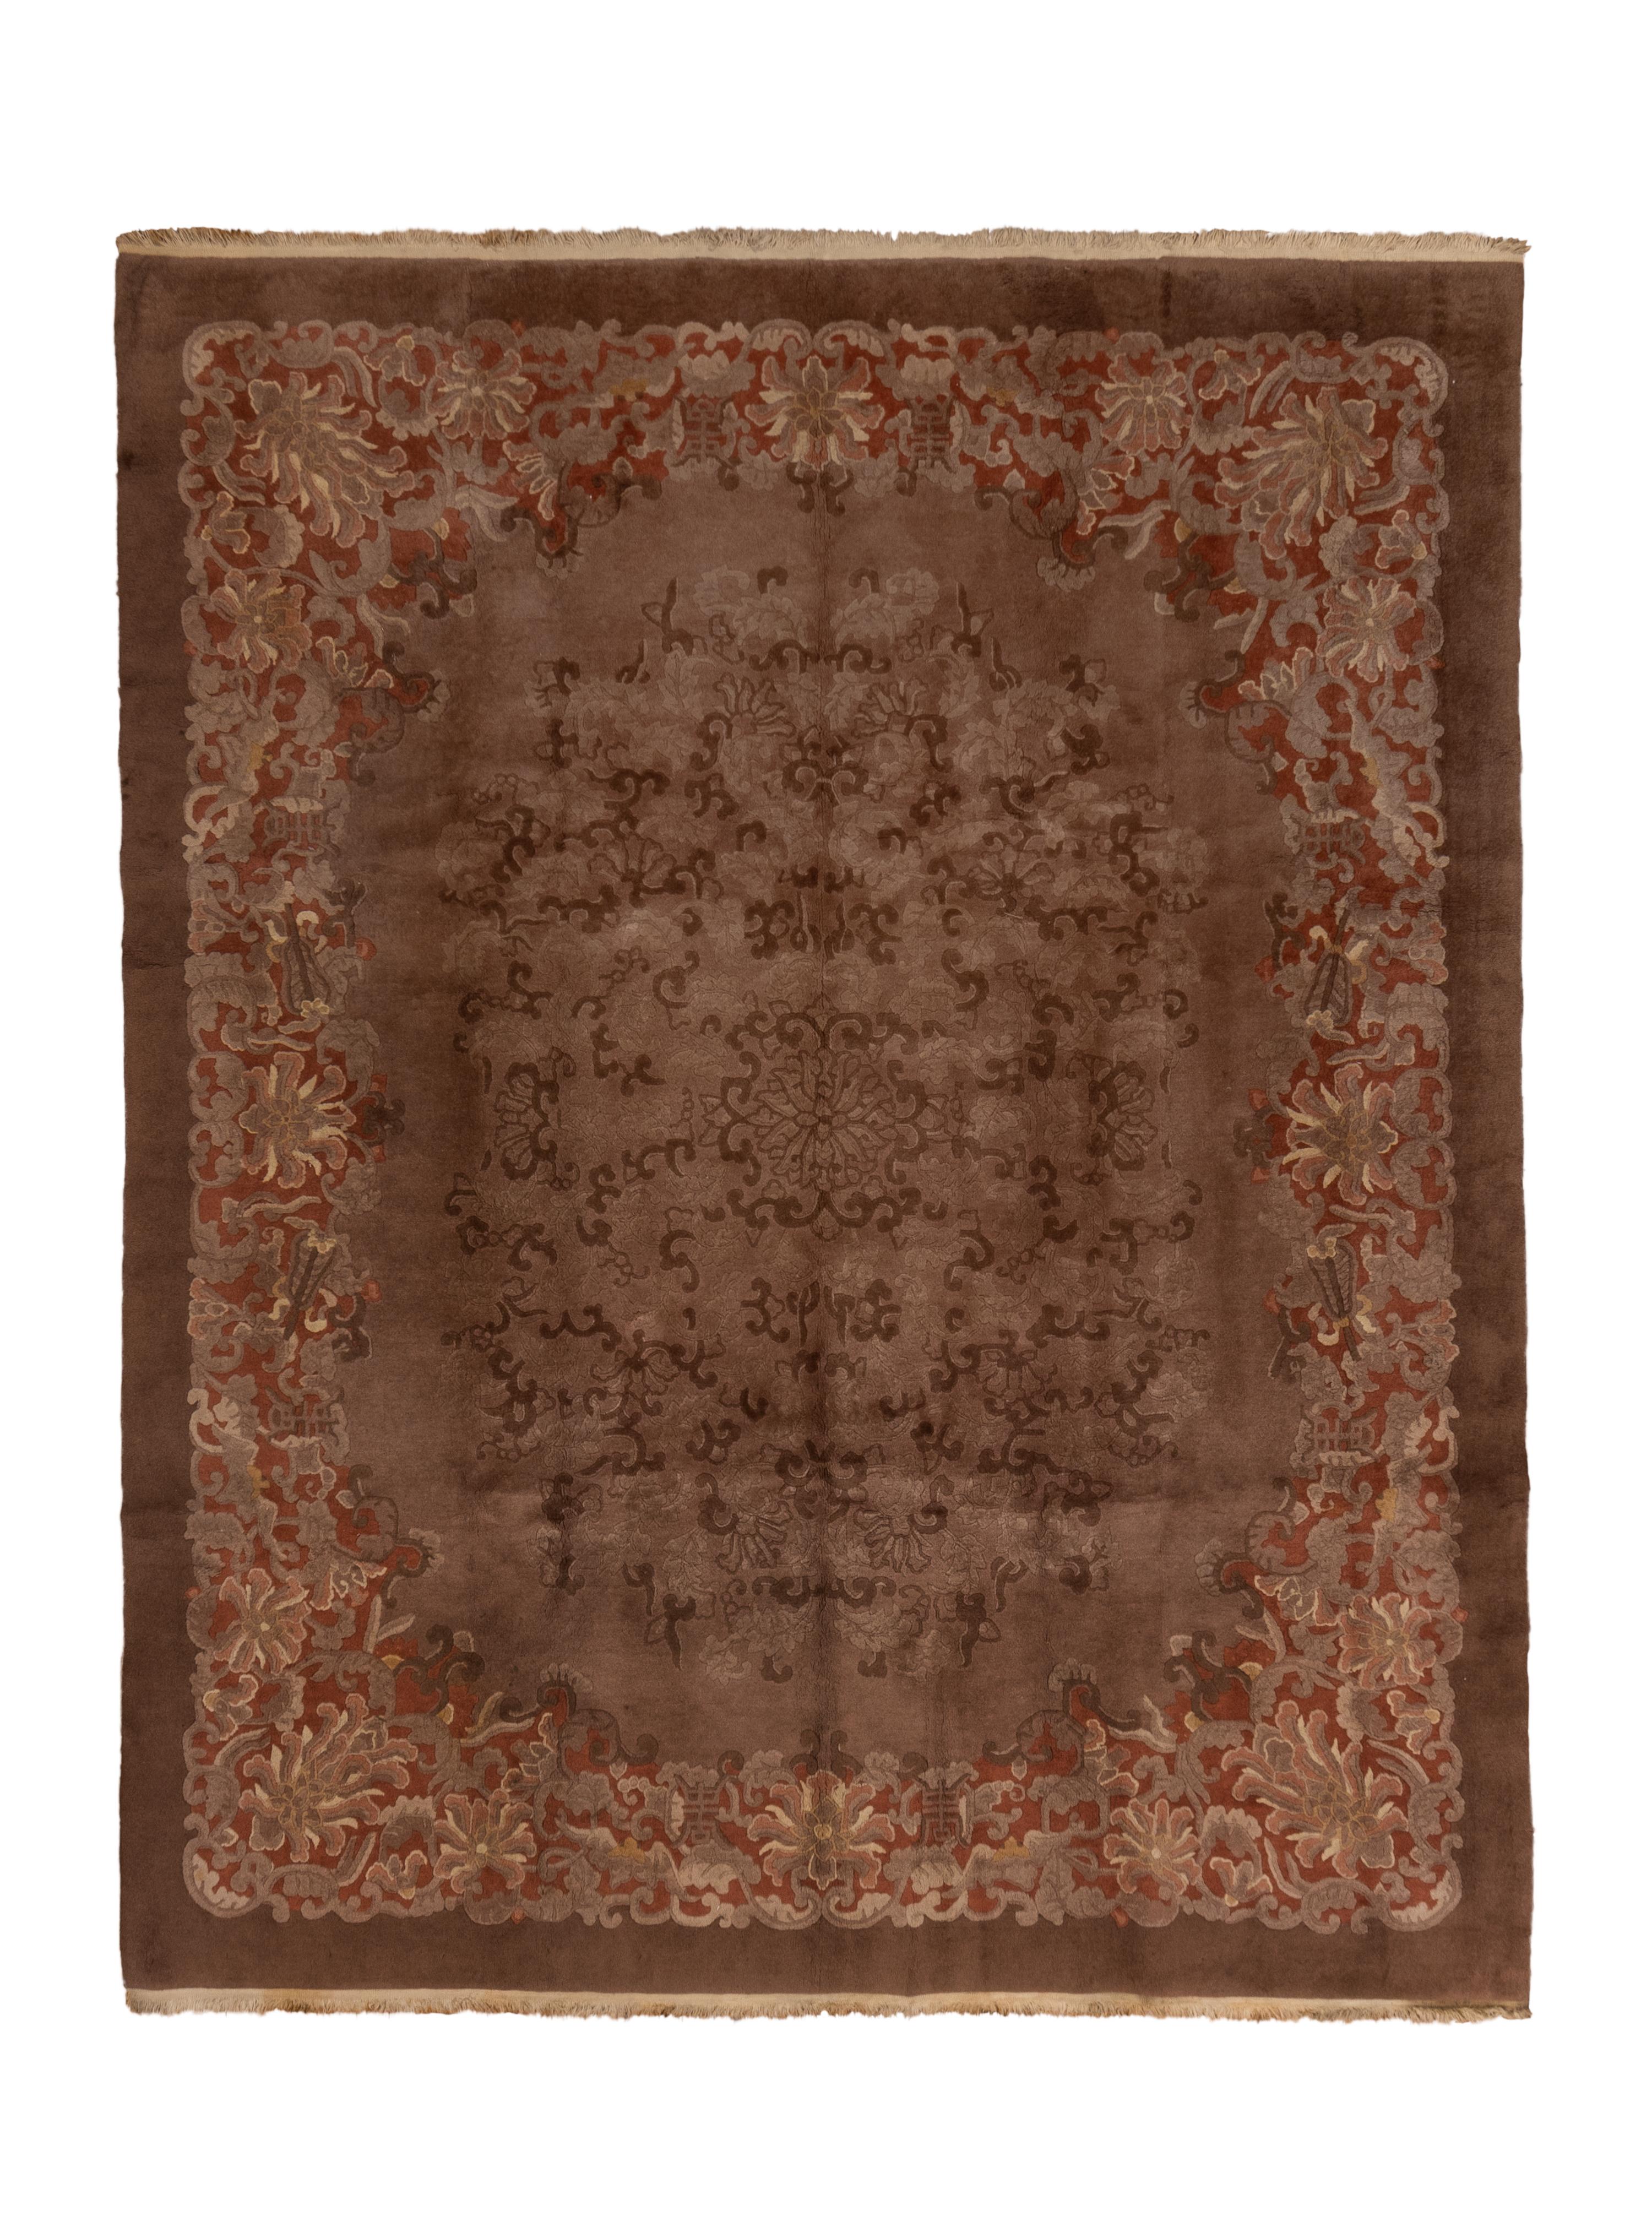 Fette carpets are, as here, usually tone-on-tone, with dense medallions and borders. Often, they show black accents to better organize the ebullient floral and leaf density. The border here is even more thick with lotus palmettes, surging foliage